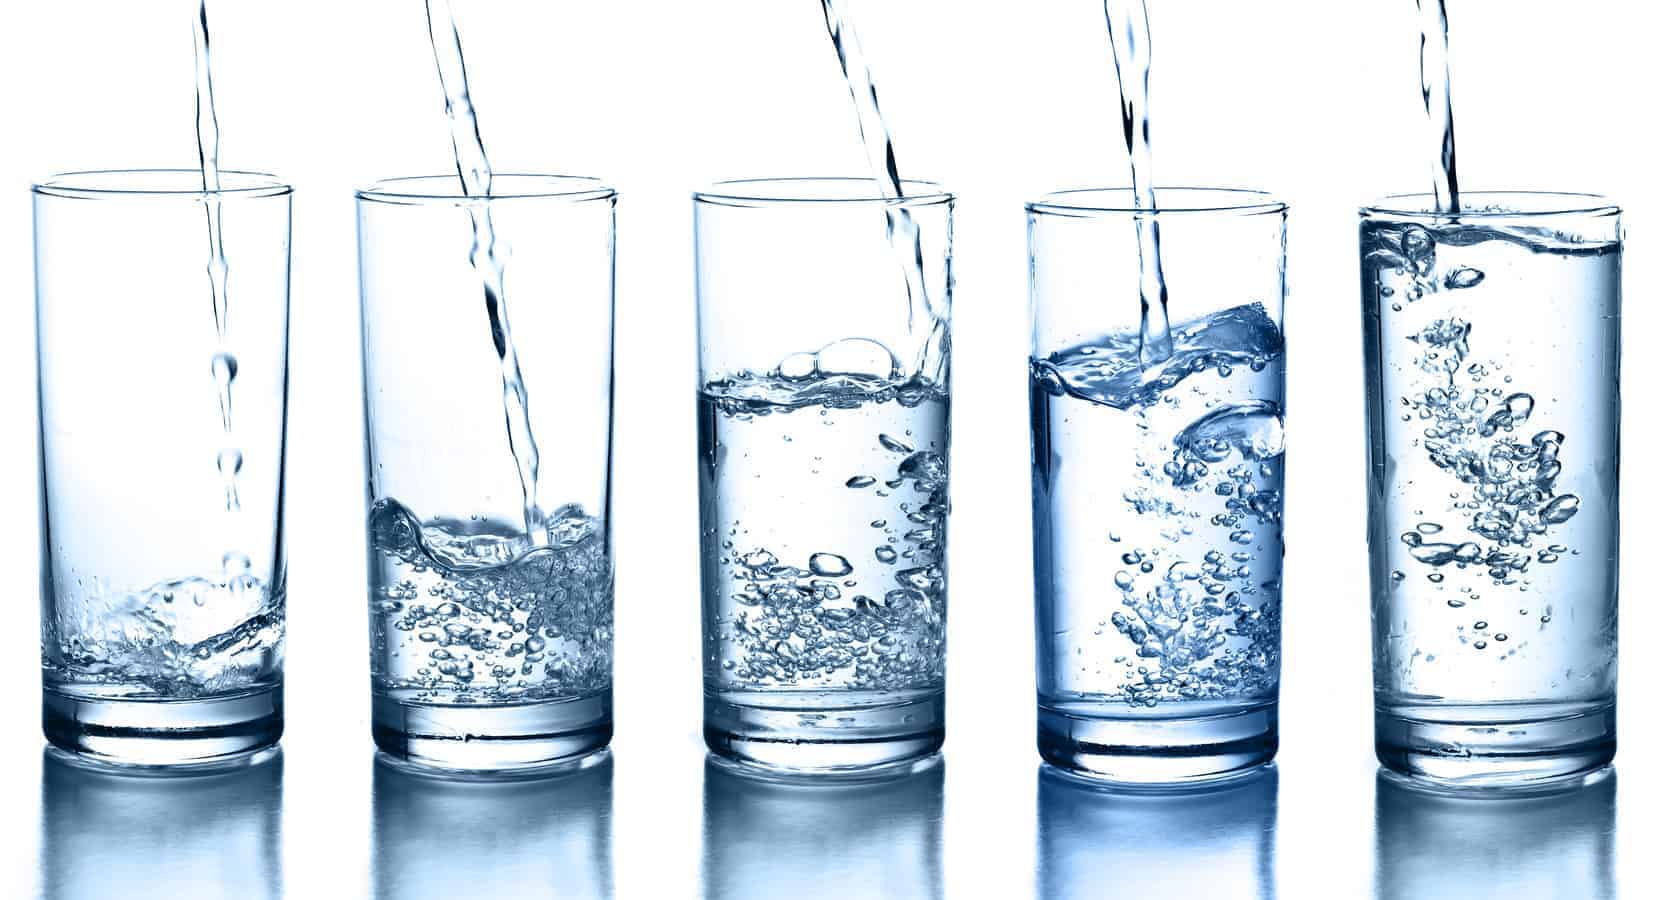 Water May be an Effective Treatment for Metabolic Syndrome